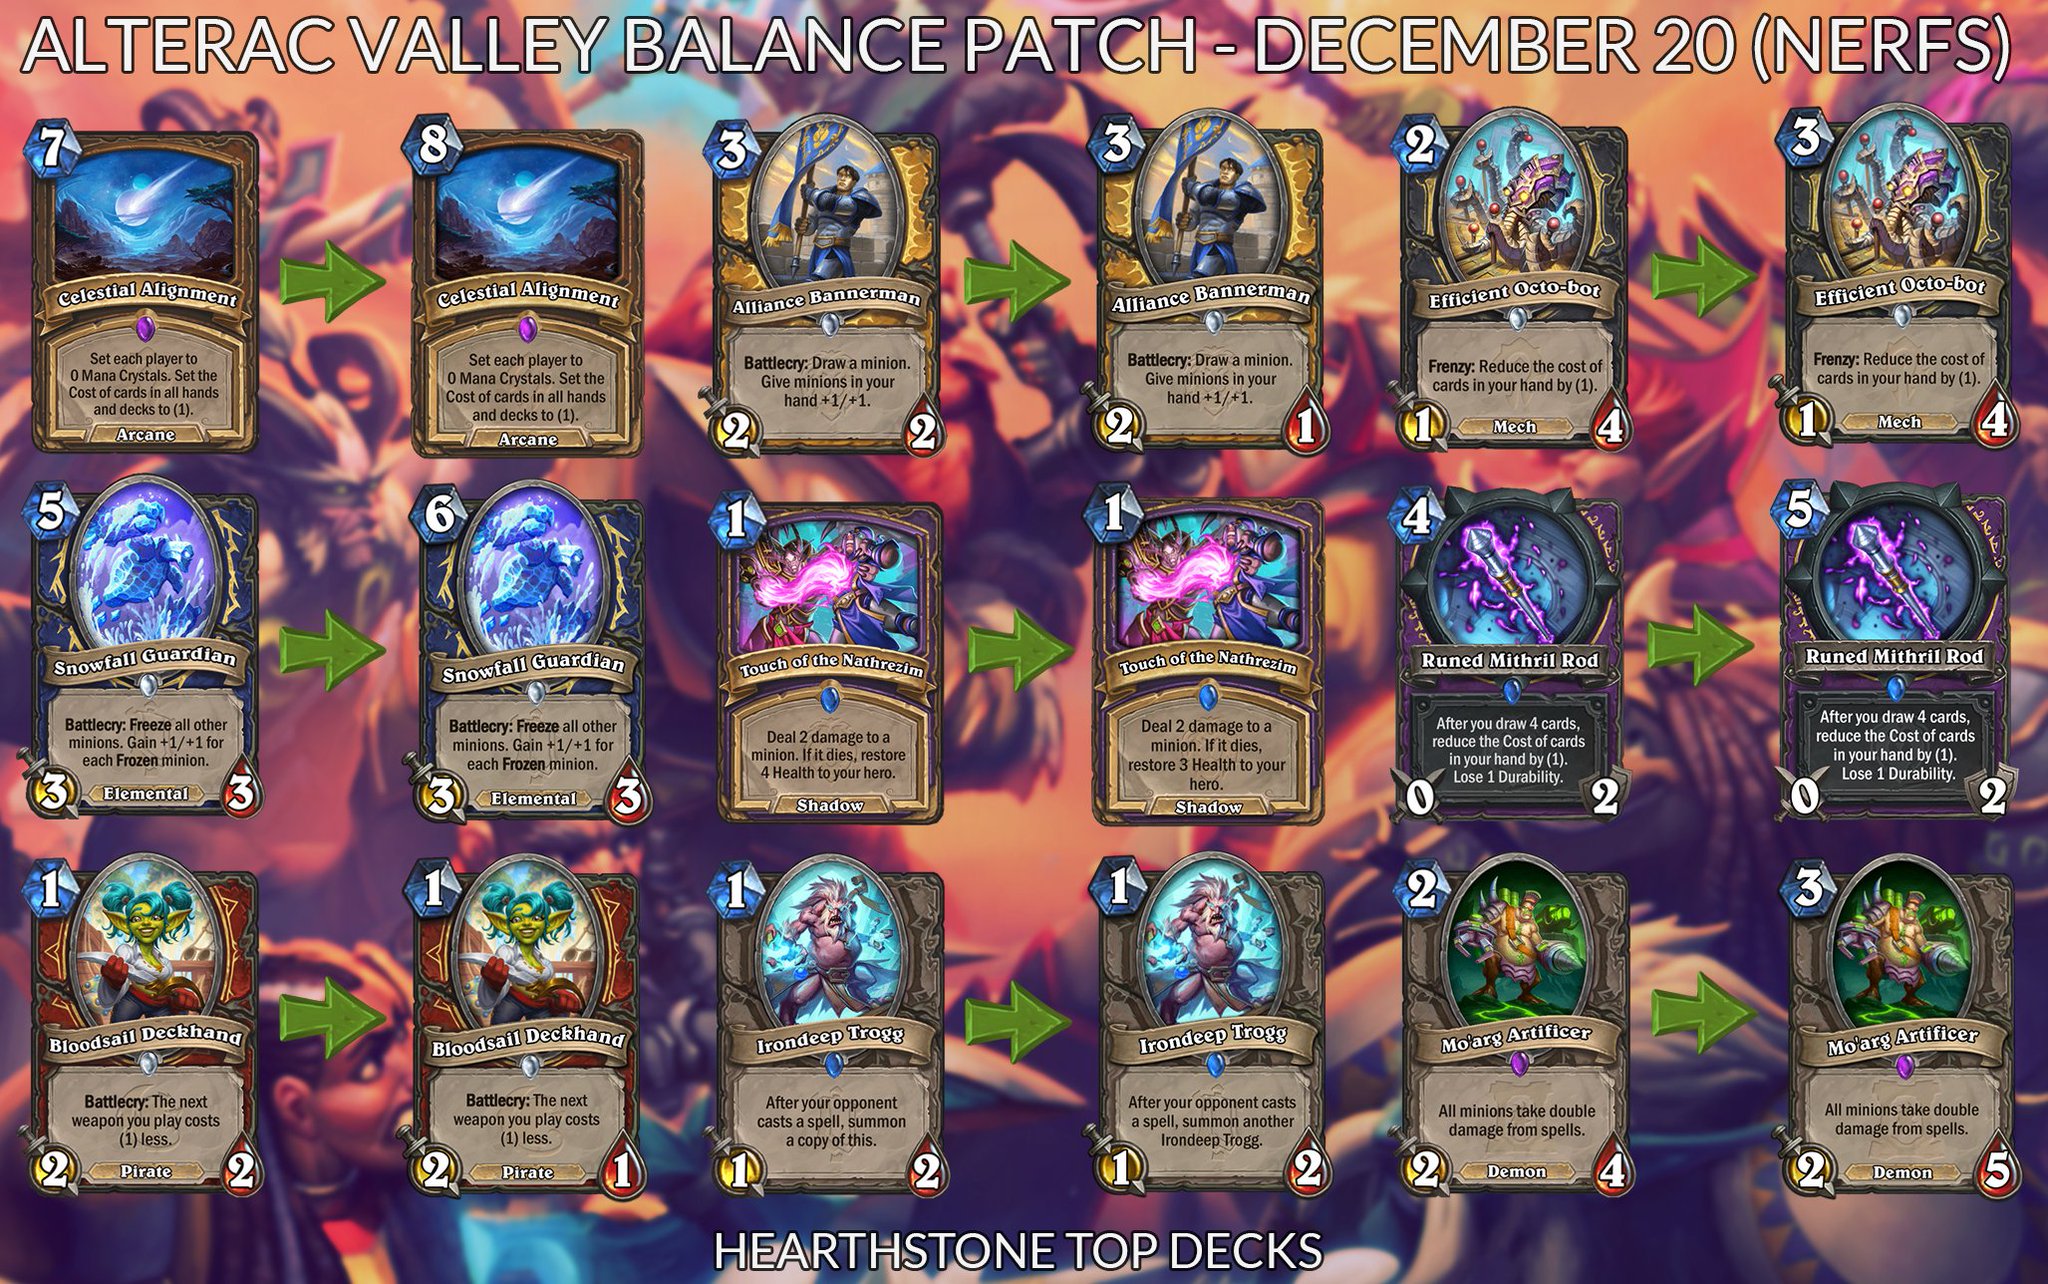 Hearthstone Top Decks on Twitter: "Balance update is coming IN AN HOUR! Constructed Nerfs (Druid, Paladin, Rogue, Shaman, Warlock, Warrior, Neutral), 5 Buffs (Mage, Hunter) + some Battlegrounds balance changes. Learn more here: https://t.co ...